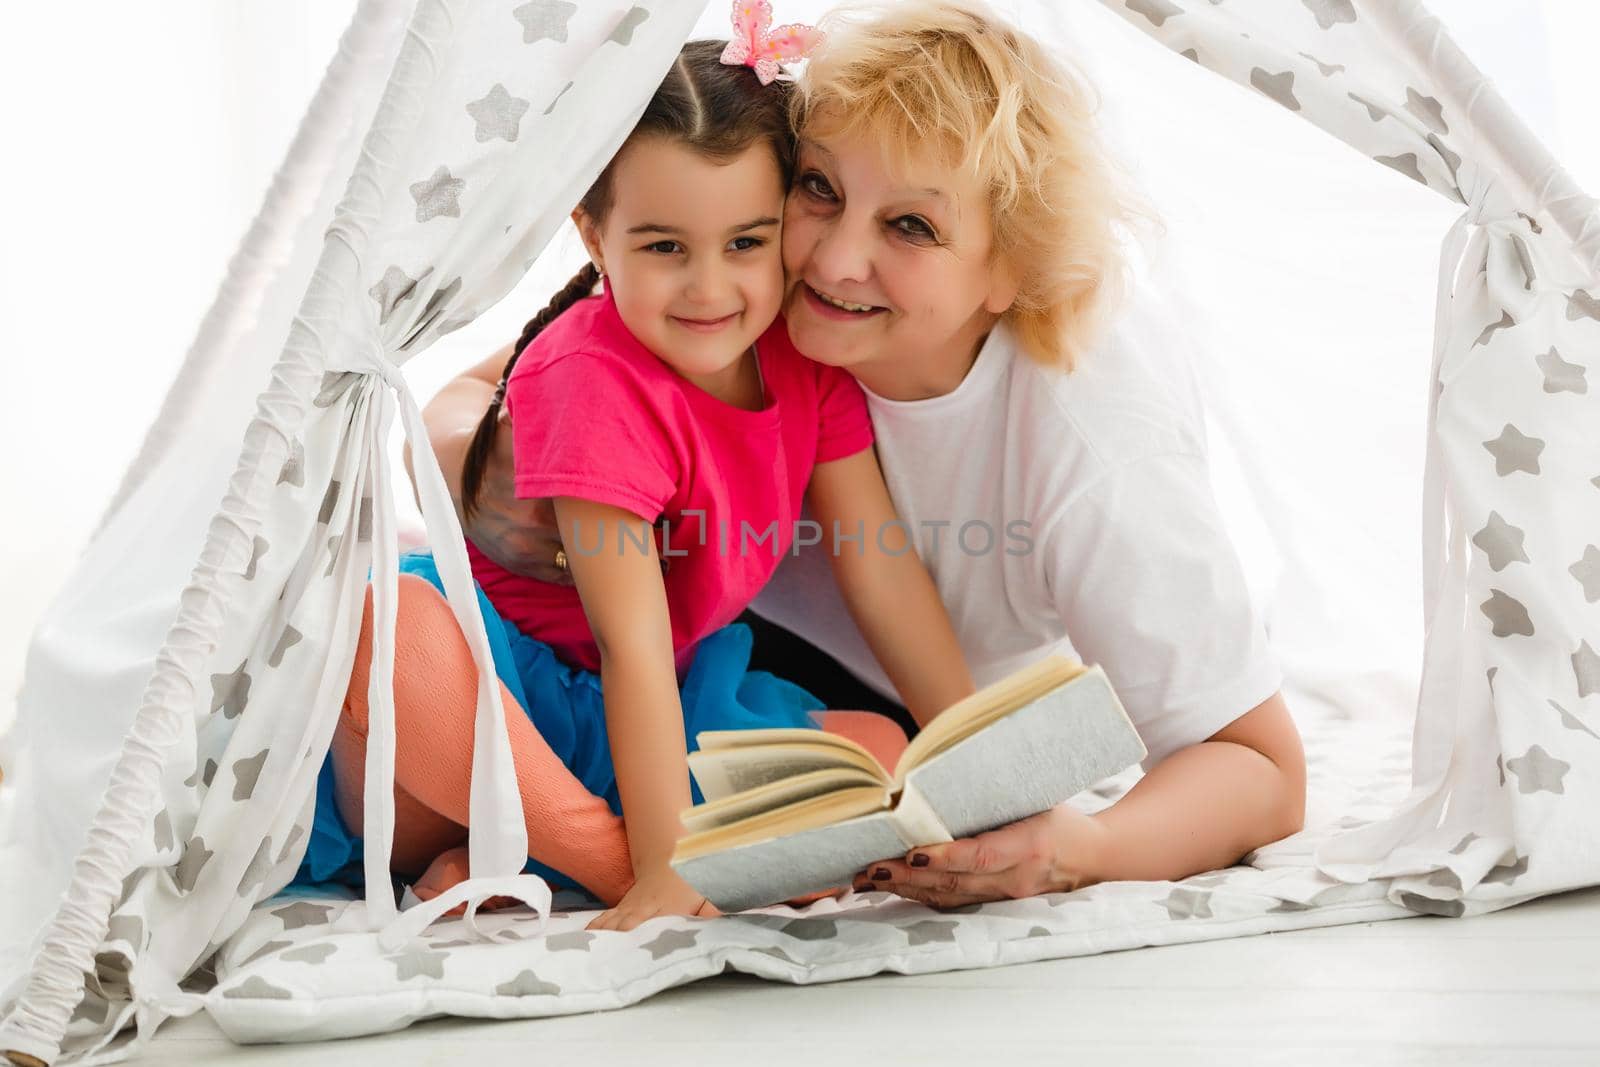 Portrait of happy senior Caucasian woman holding book with little girl in a tent